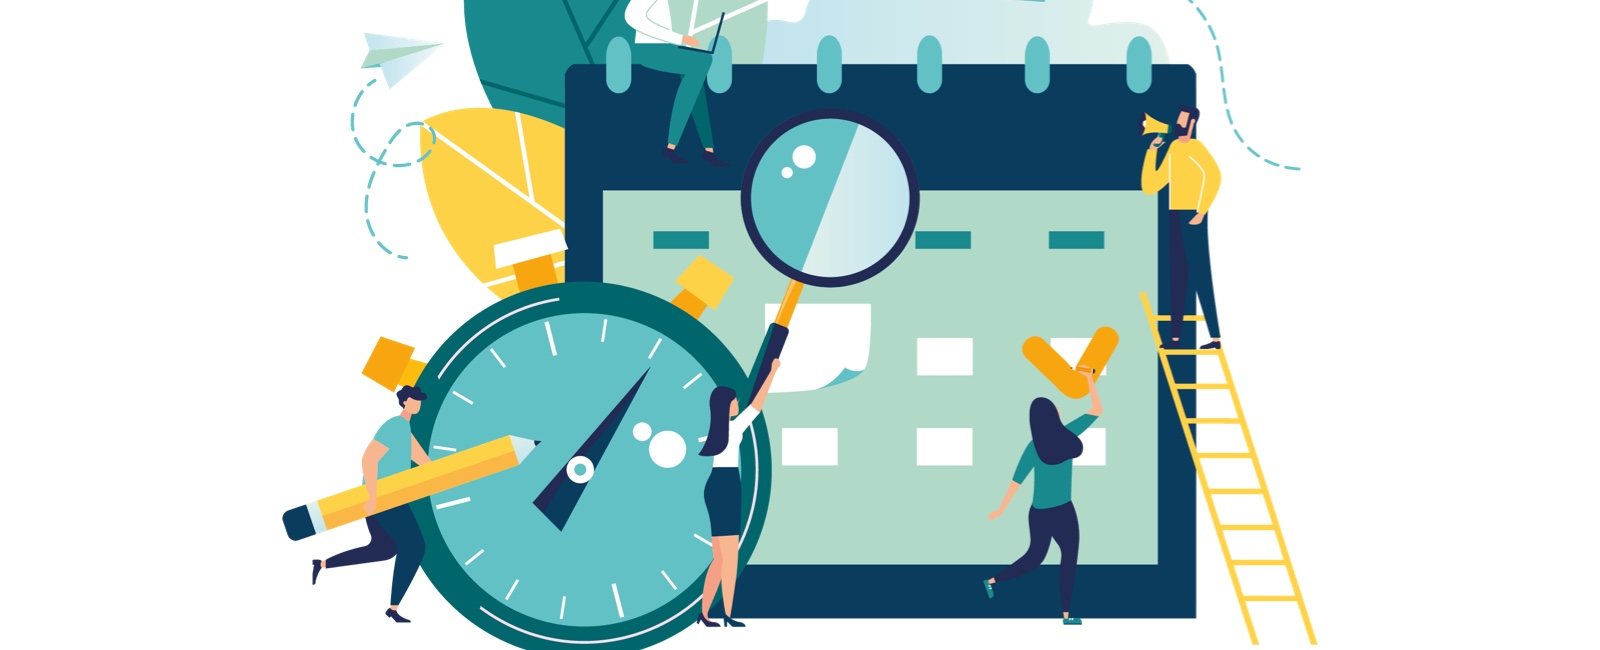 A Student-Centered Approach to Faculty Training: Using the LMS to Foster Students’ Time Management